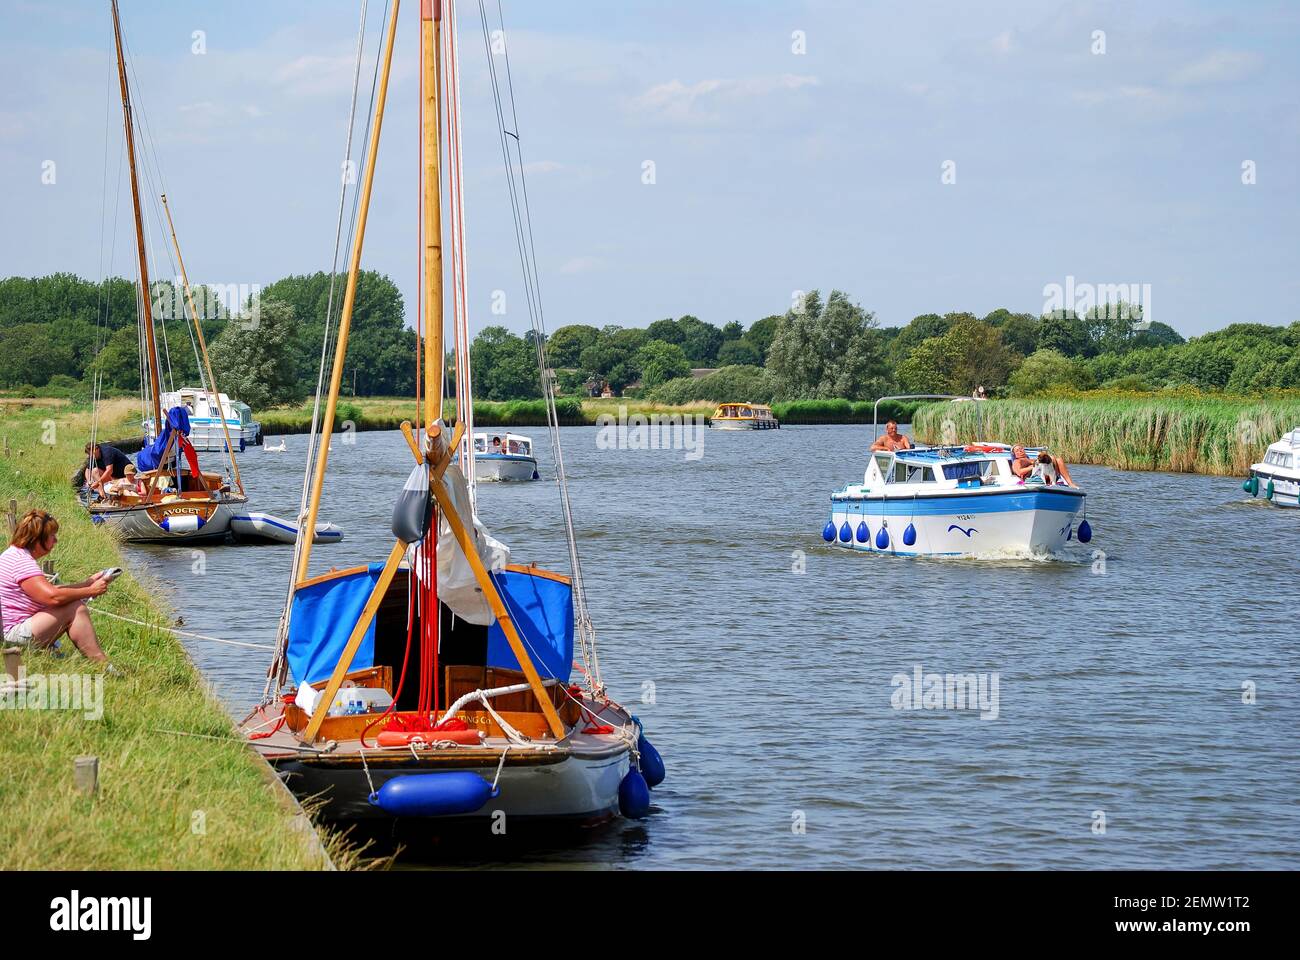 Boats on River Bure à Acle Pont, Norfolk Broads, Norfolk, Angleterre, Royaume-Uni Banque D'Images